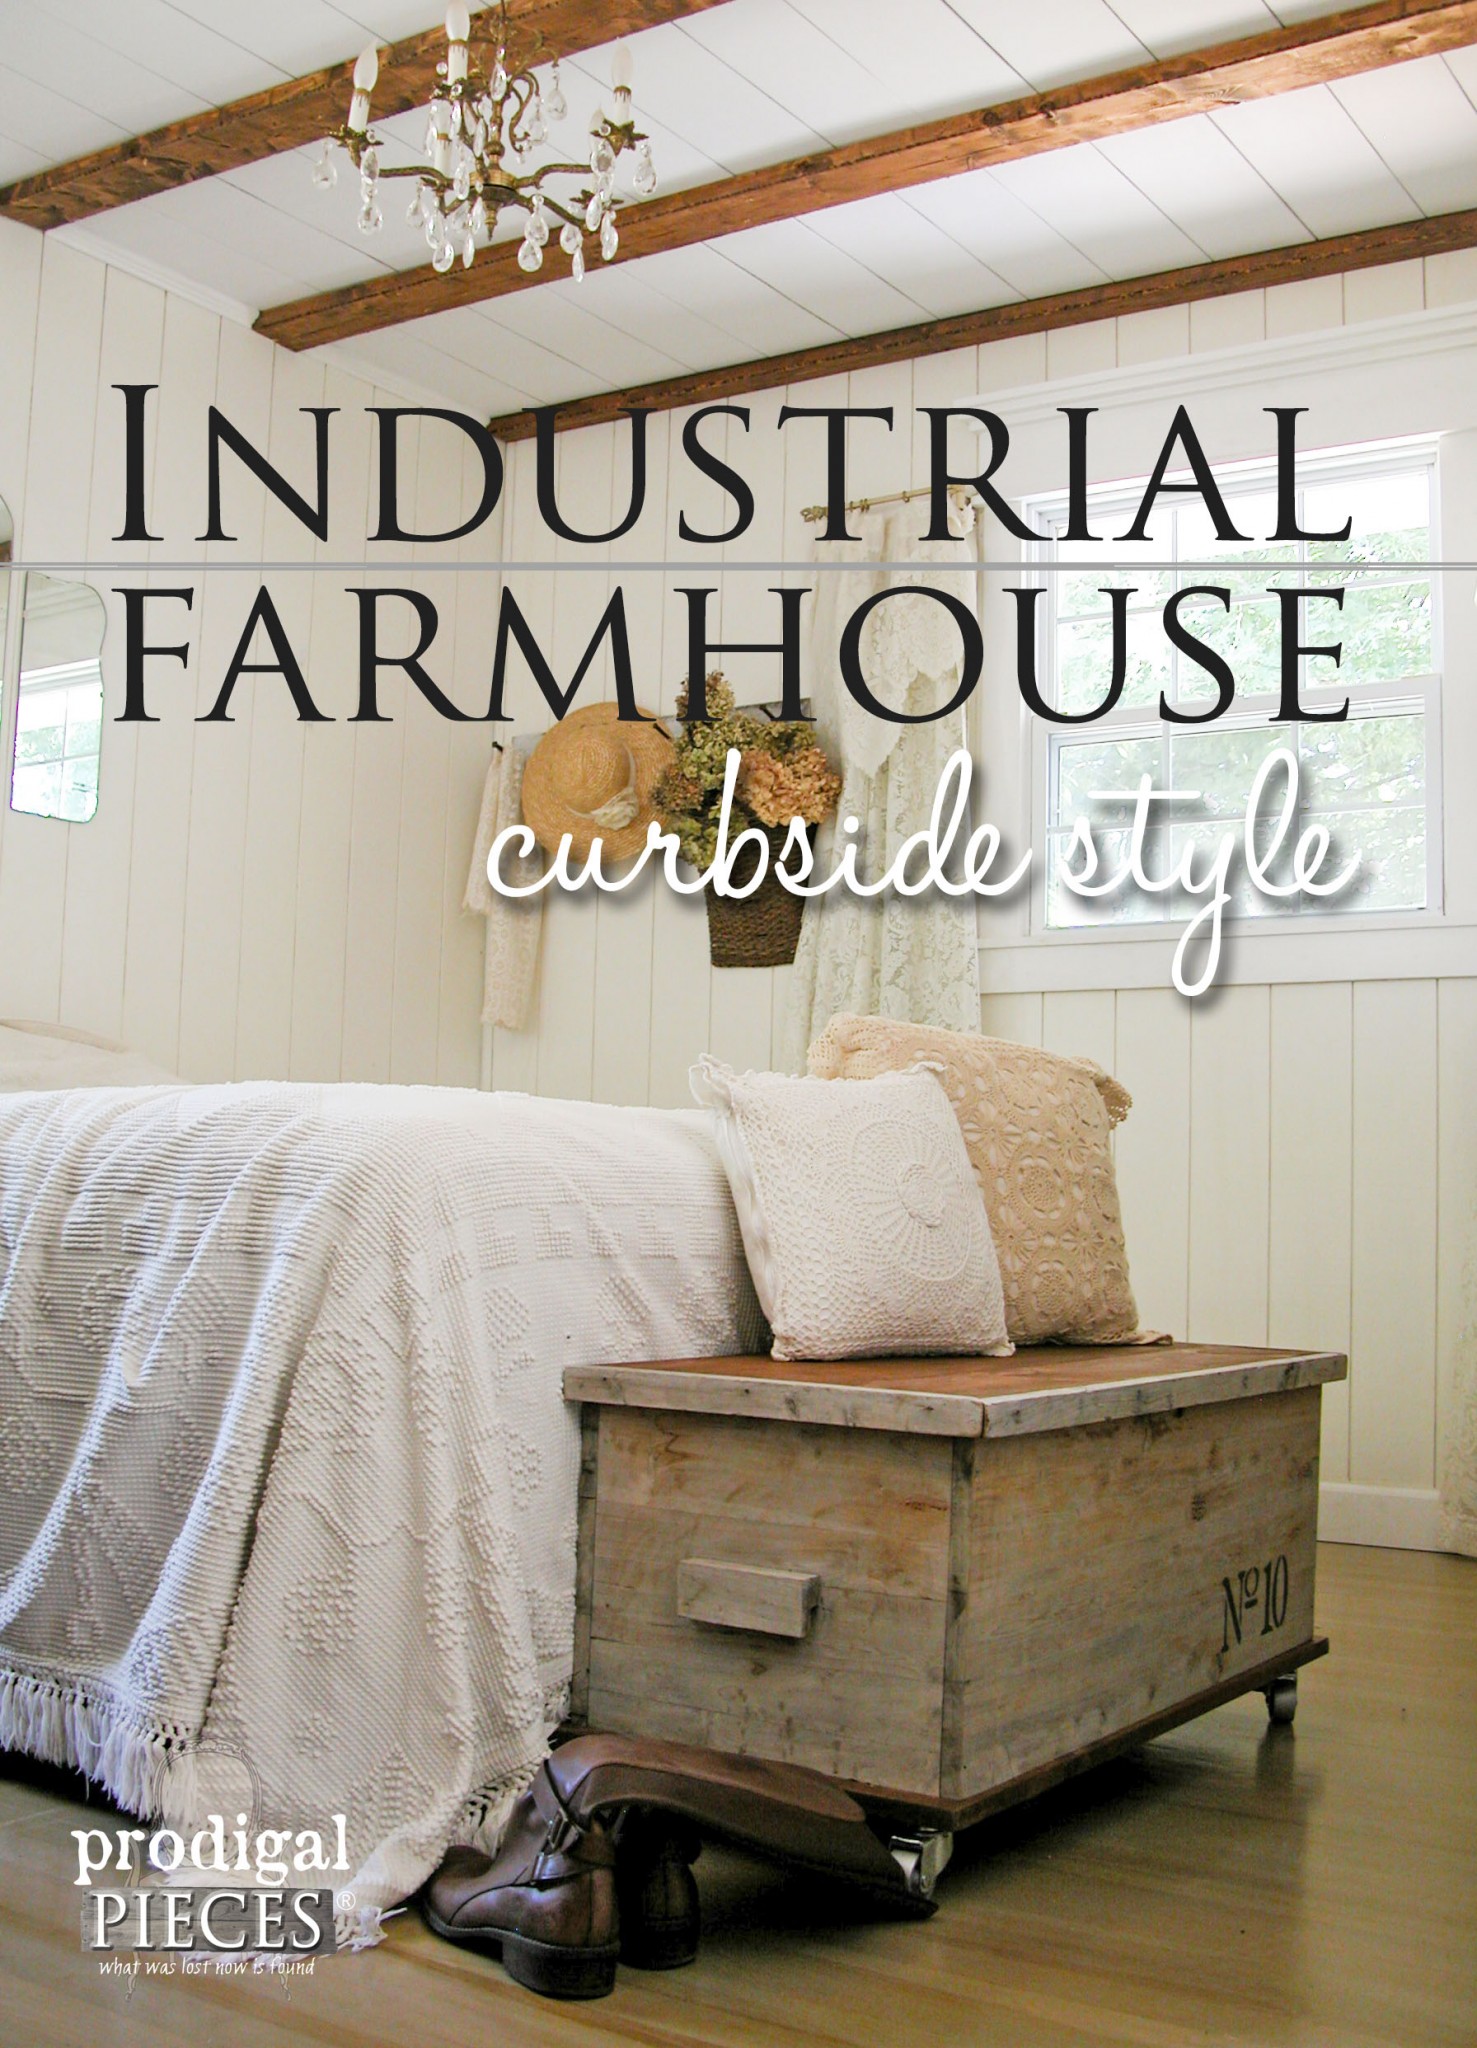 A Cedar Chest Found in the Trash Becomes Industrial Style Decor in this Farmhouse Bedroom by Prodigal Pieces | www.prodigalpieces.com